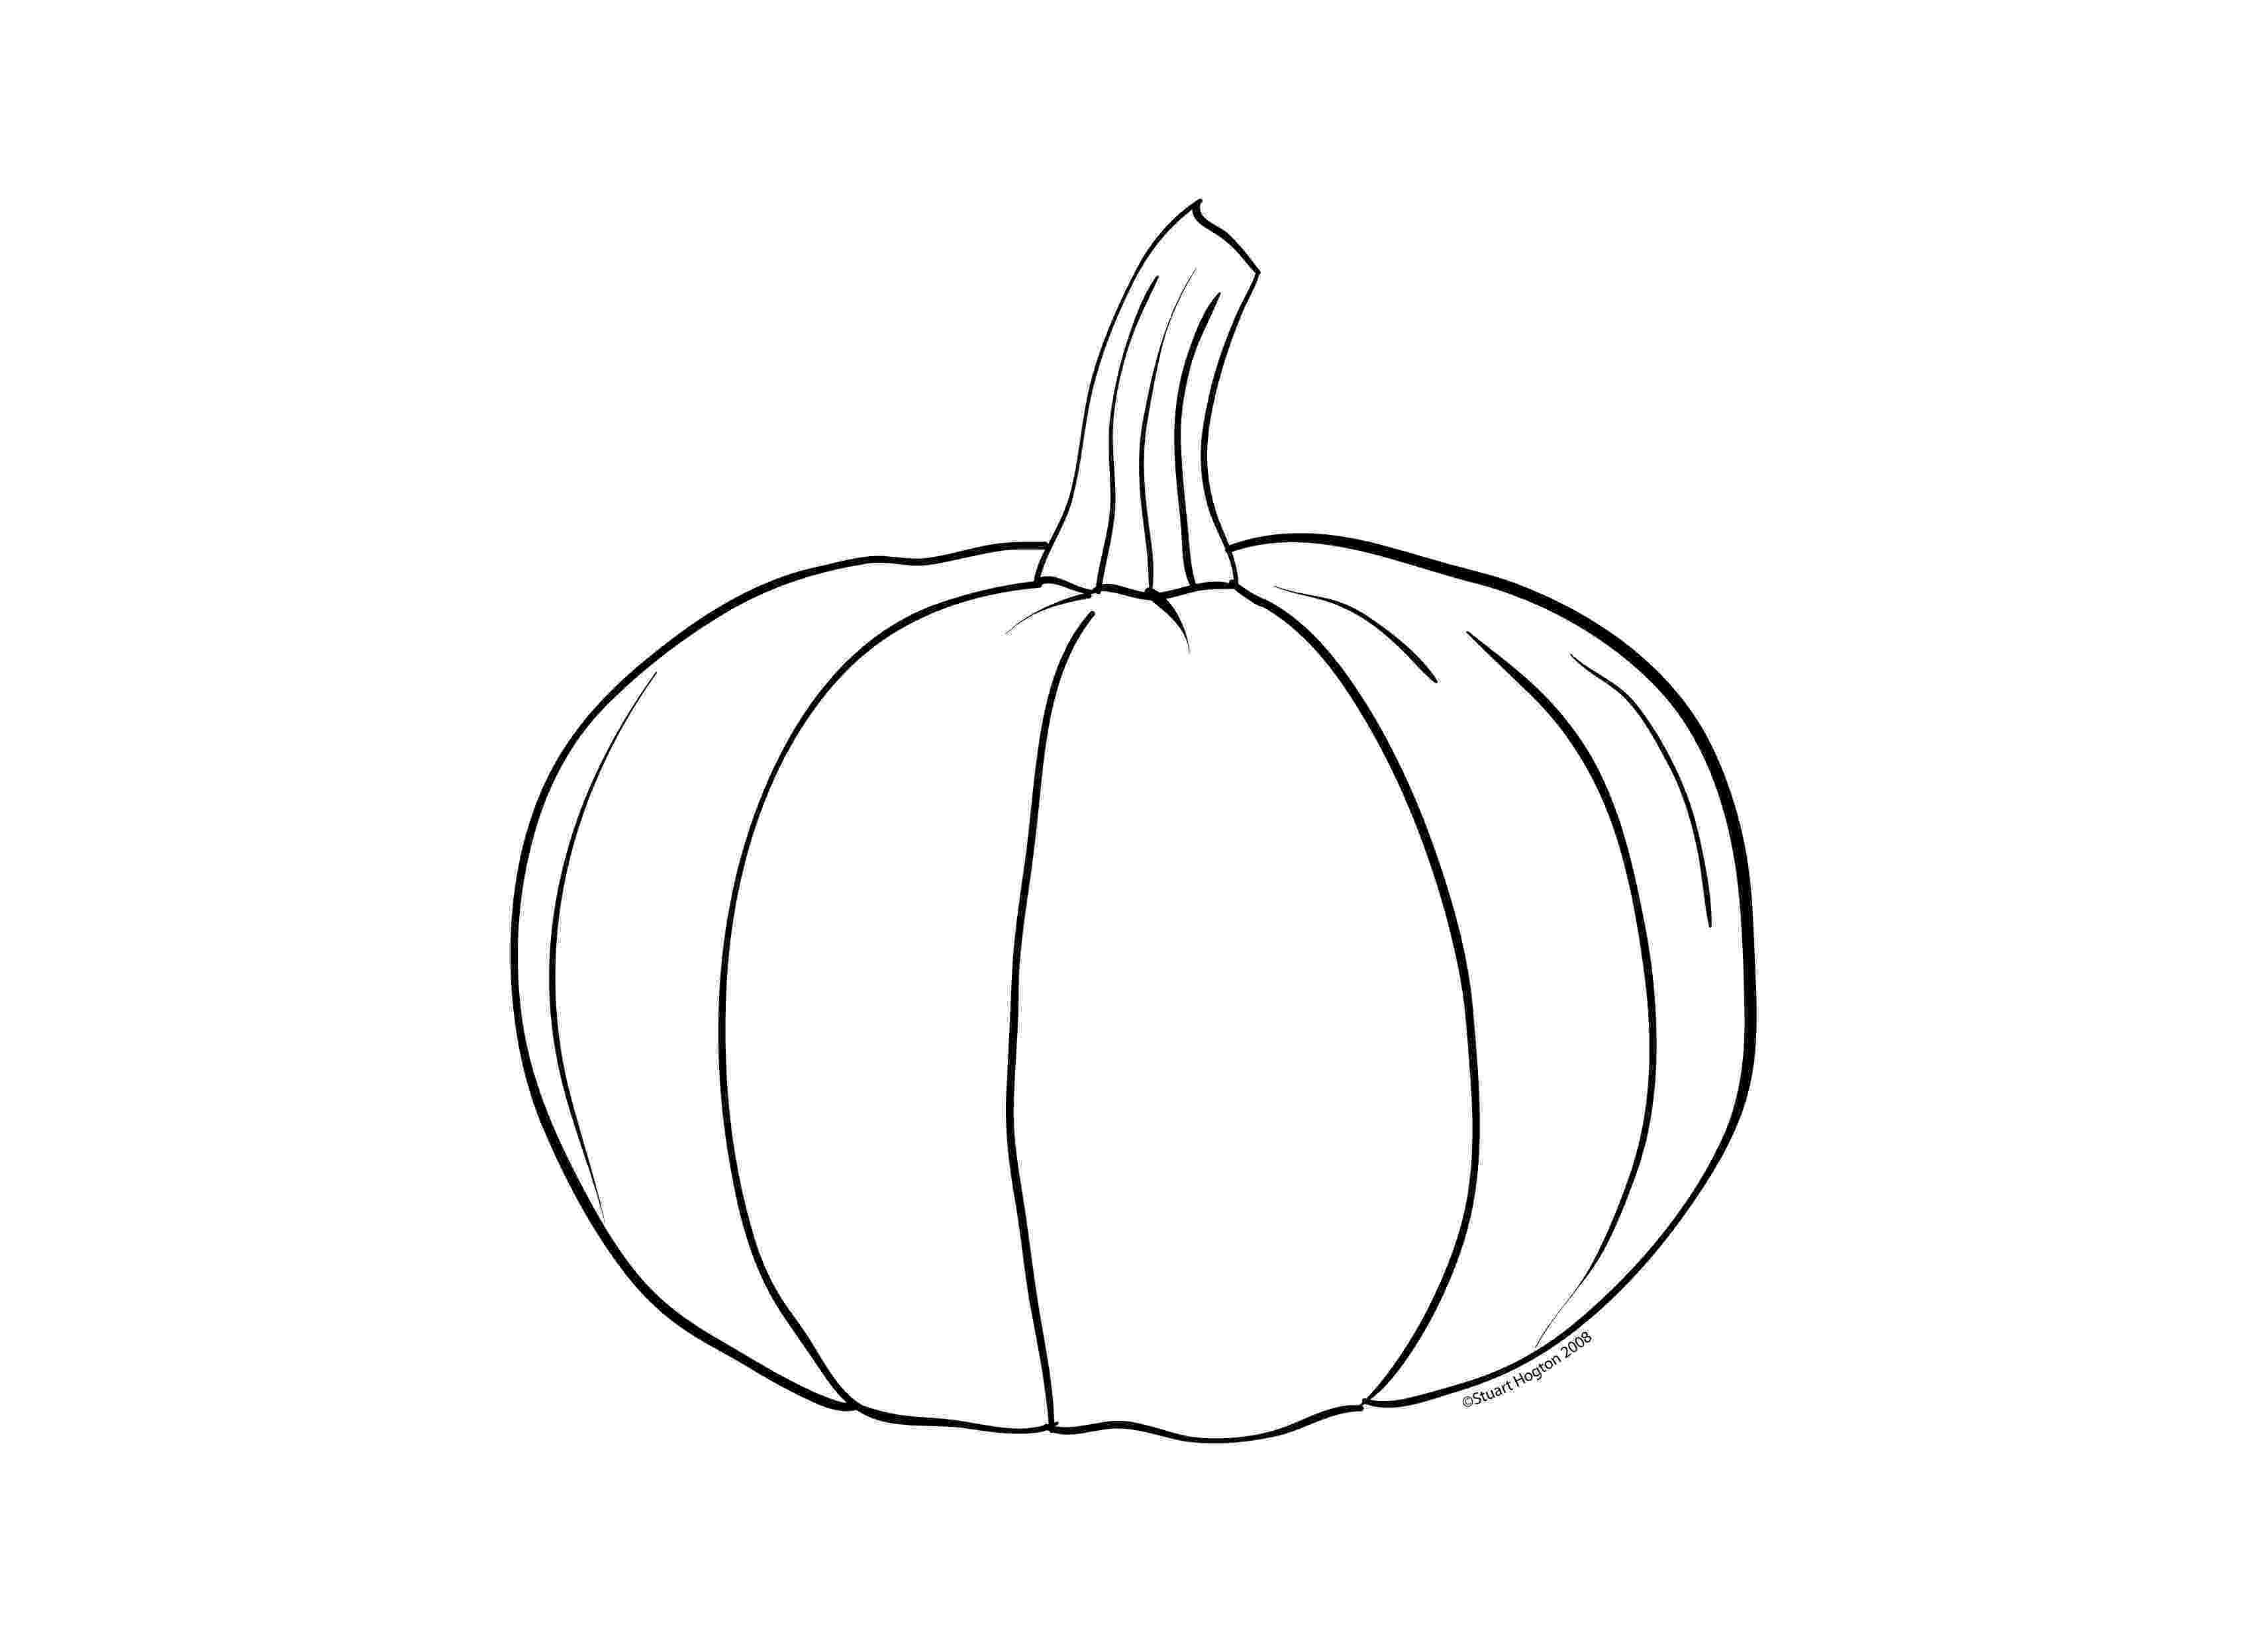 coloring pages for pumpkins pumpkin coloring page free printable coloring pages coloring pages pumpkins for 